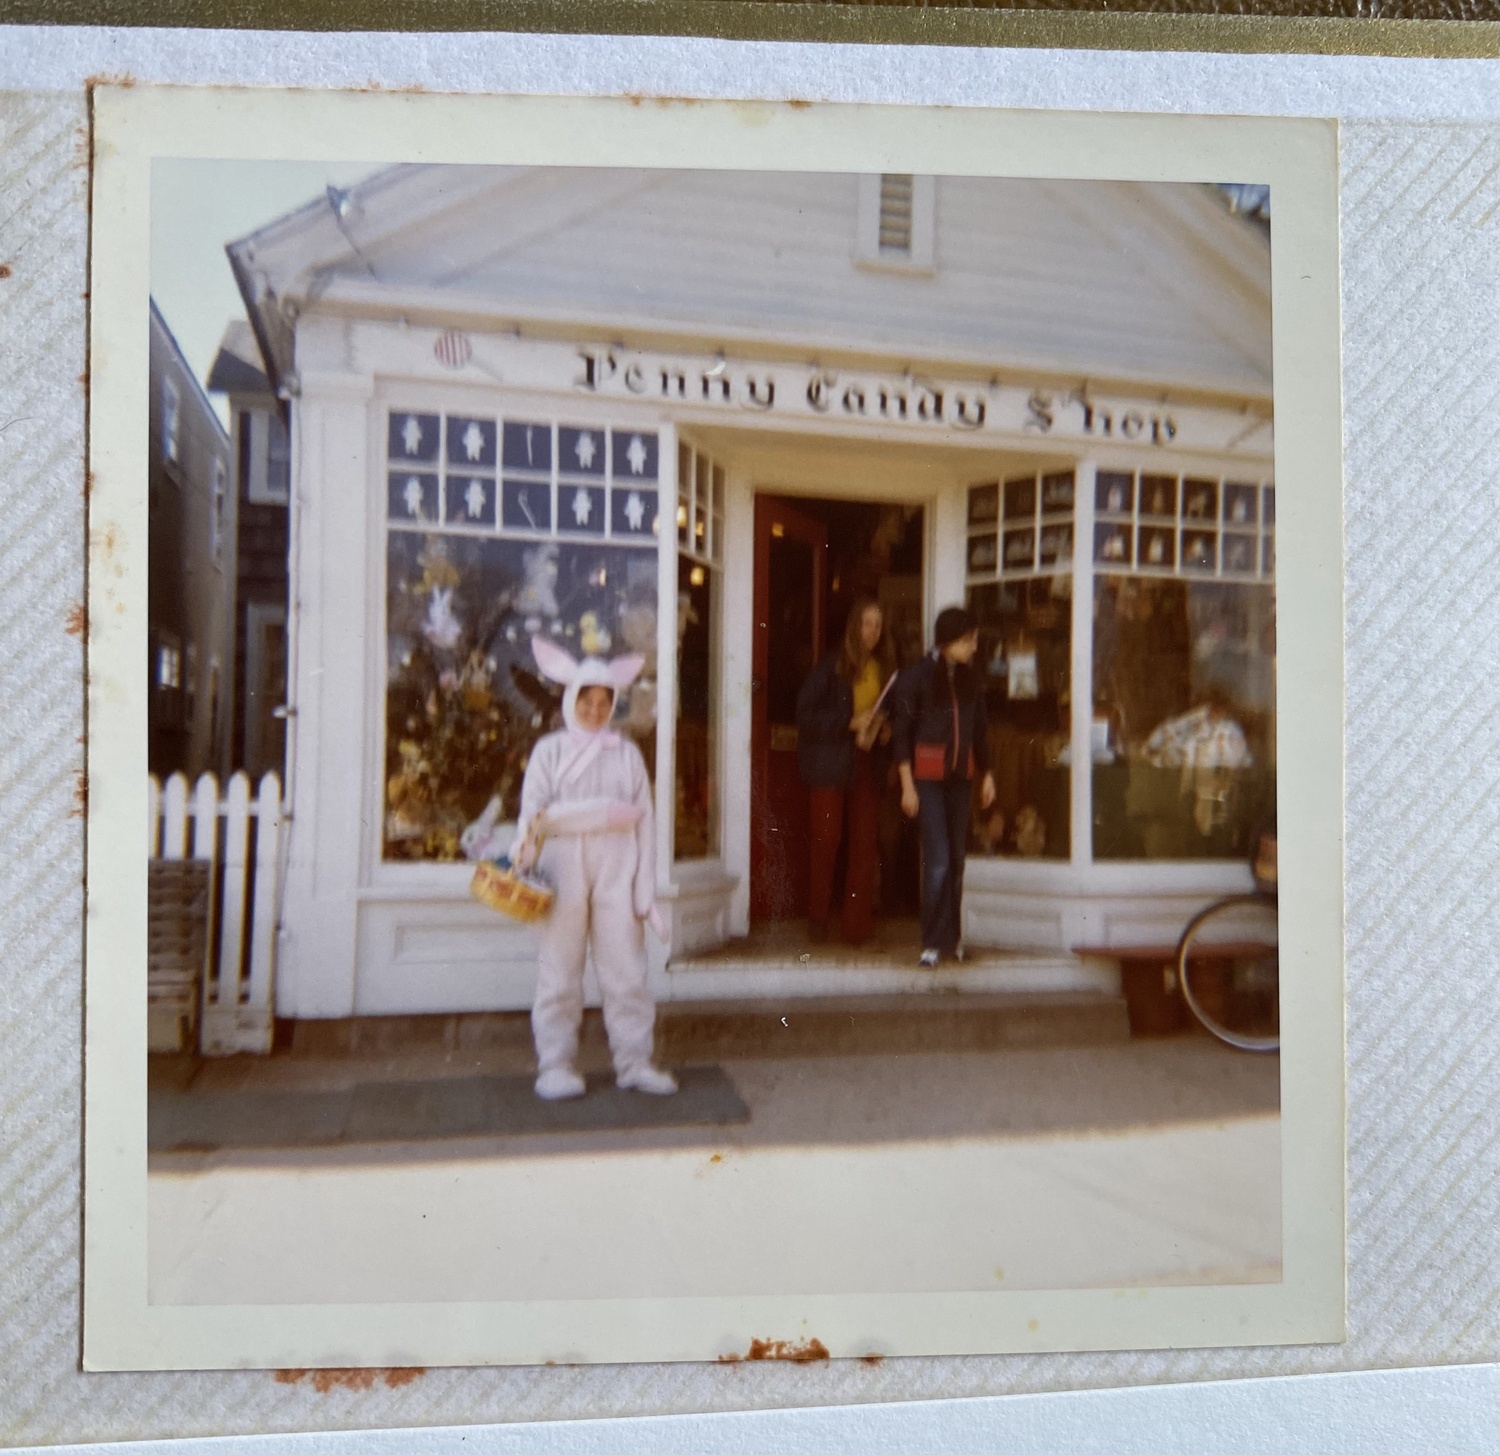 Eileen Noonan as a teenager, donning a bunny suit in front of the Penny Candy Shop in Water Mill, flags down passersby to wish them a happy Easter. COURTESY EILEEN NOONAN